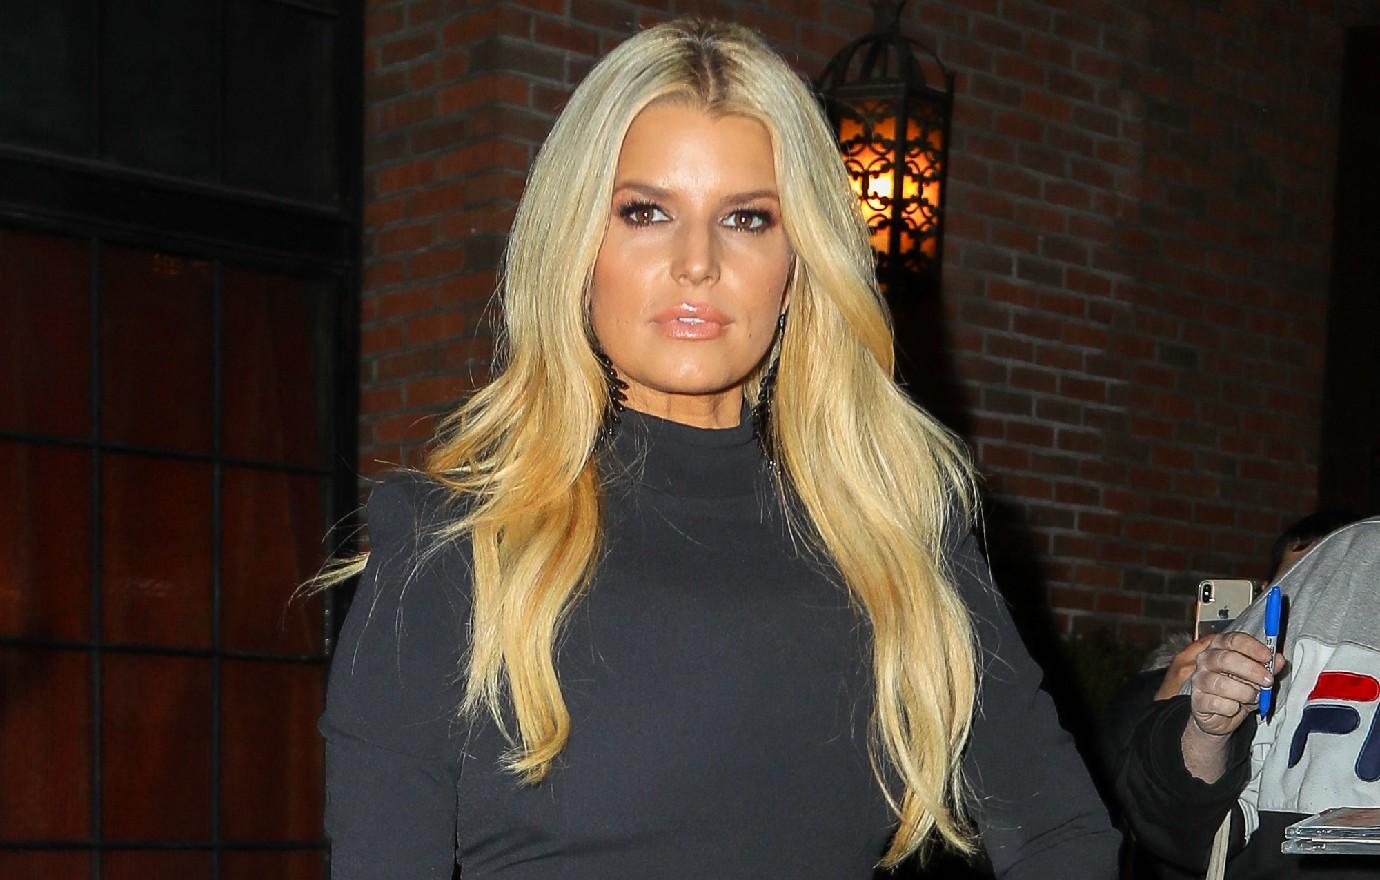 Jessica Simpson Celebrates Four Years of Sobriety by Sharing a Photo of an  “Unrecognizable Version” of Herself